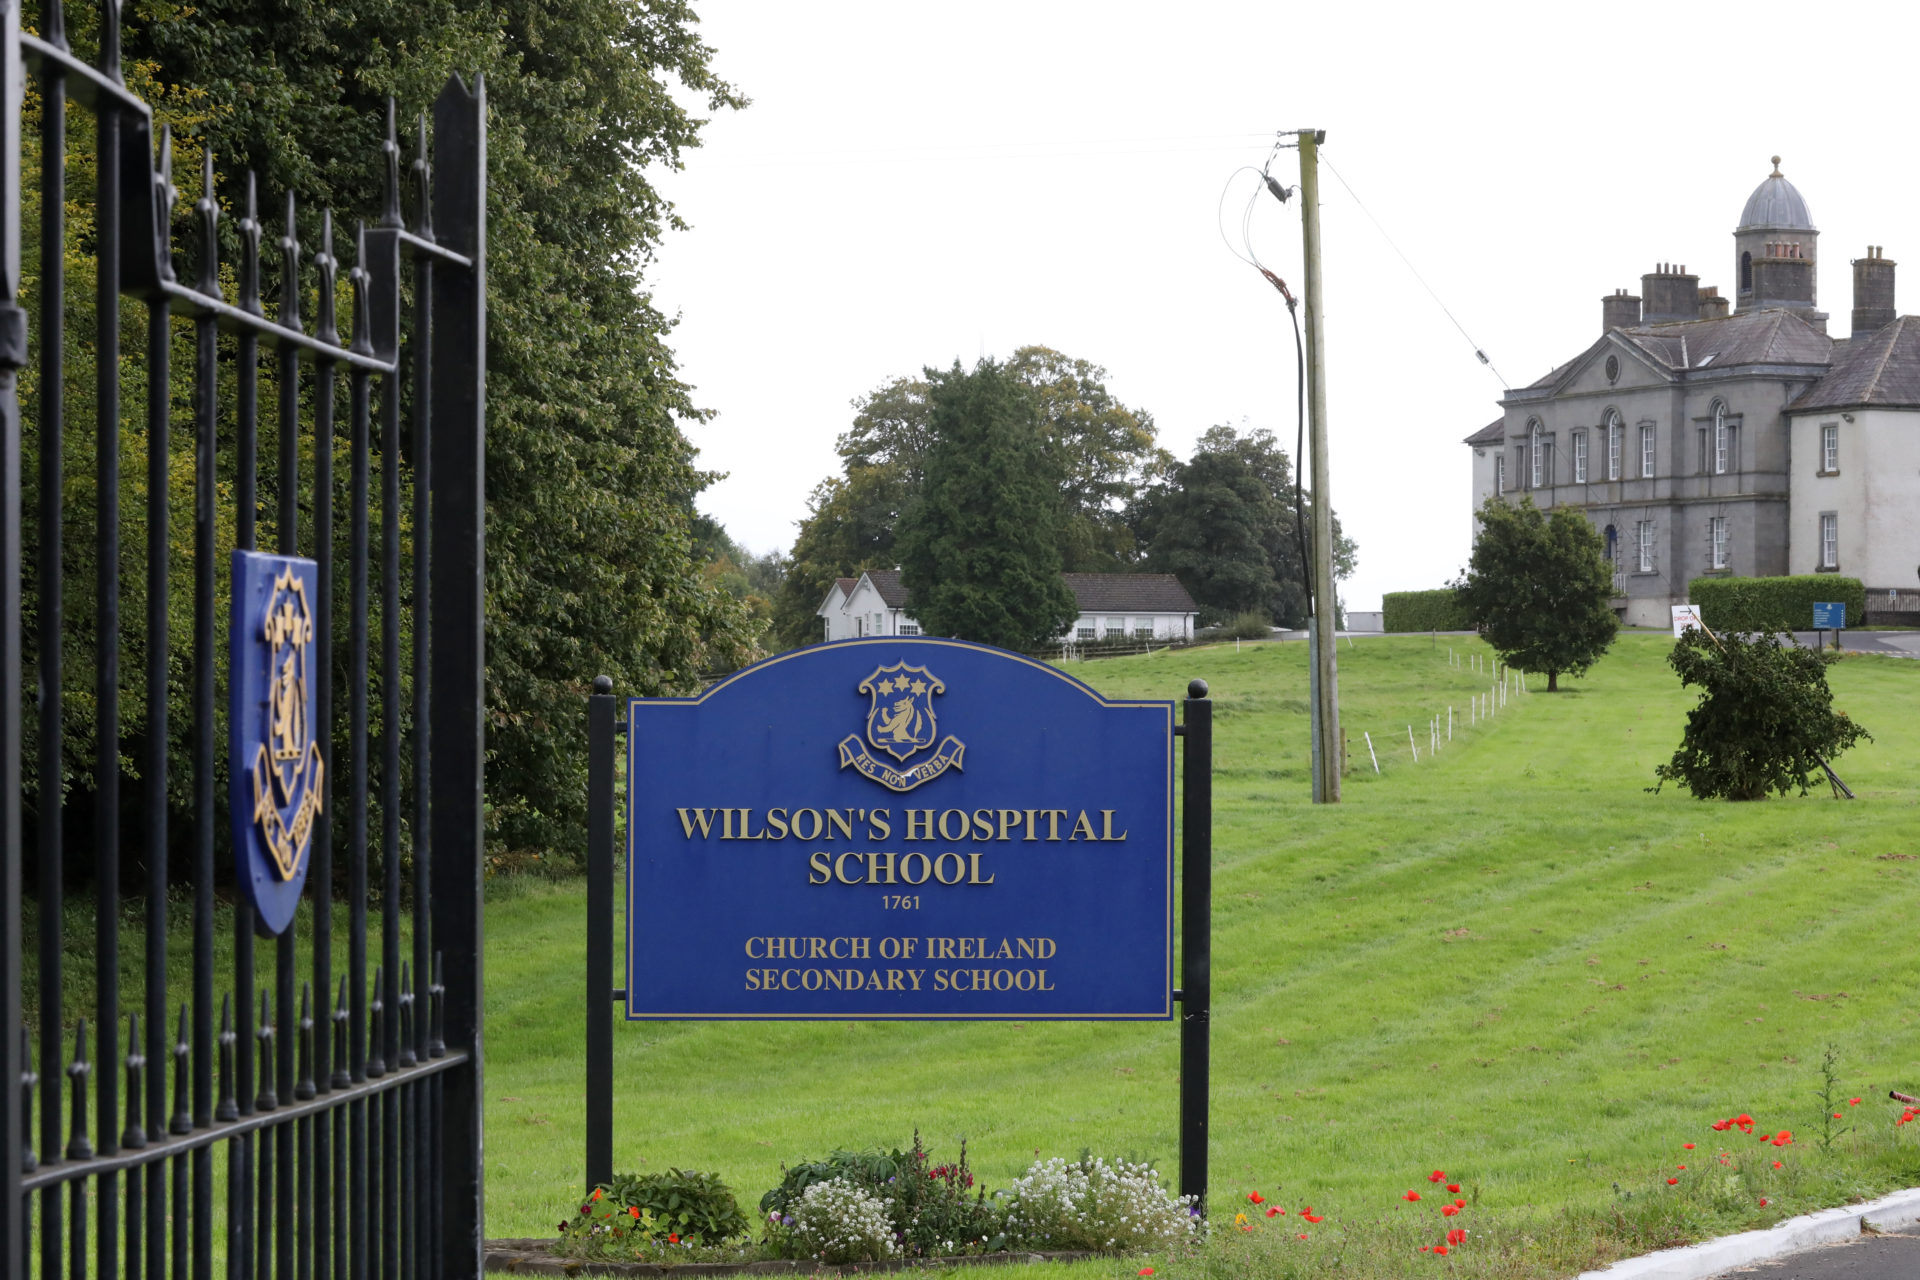 A view of Wilson's Hospital School in Co Westmeath